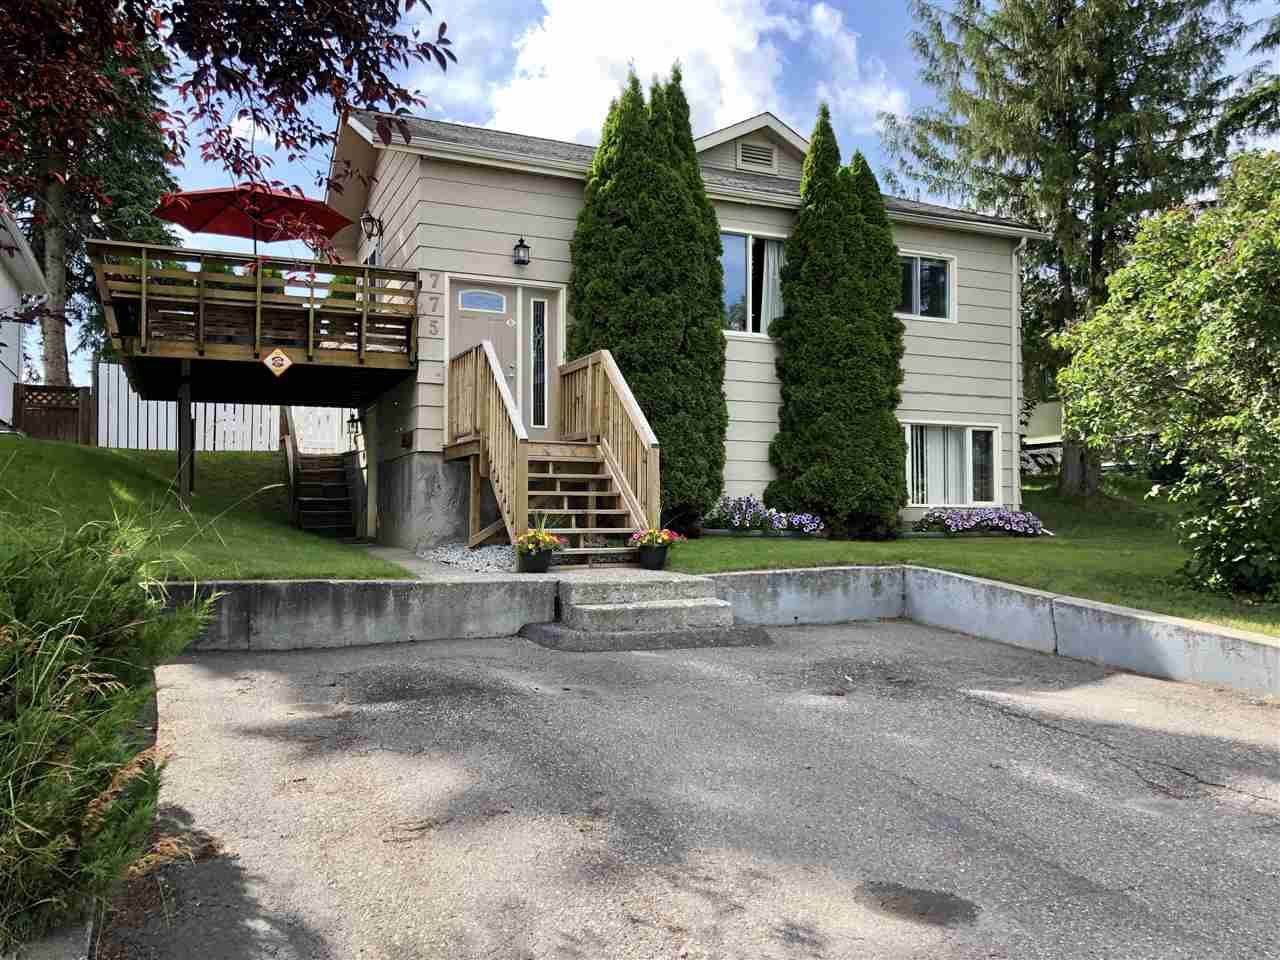 Main Photo: 775 FREEMAN Street in Prince George: Central House for sale (PG City Central (Zone 72))  : MLS®# R2474569